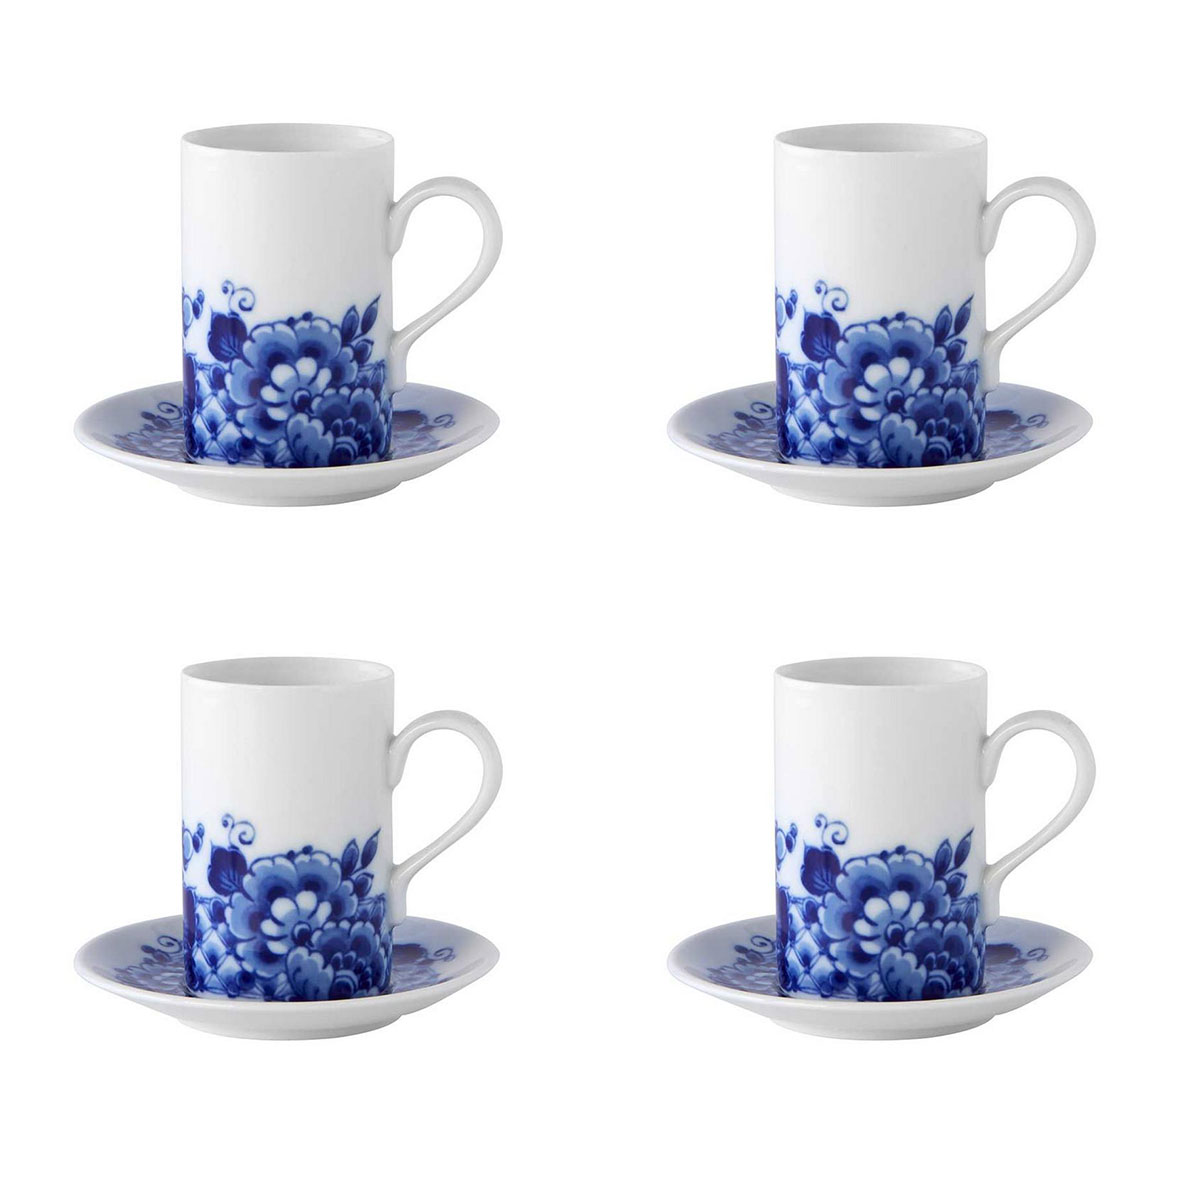 Vista Alegre Porcelain Blue Ming Coffee Cup And Saucer, Set of 4